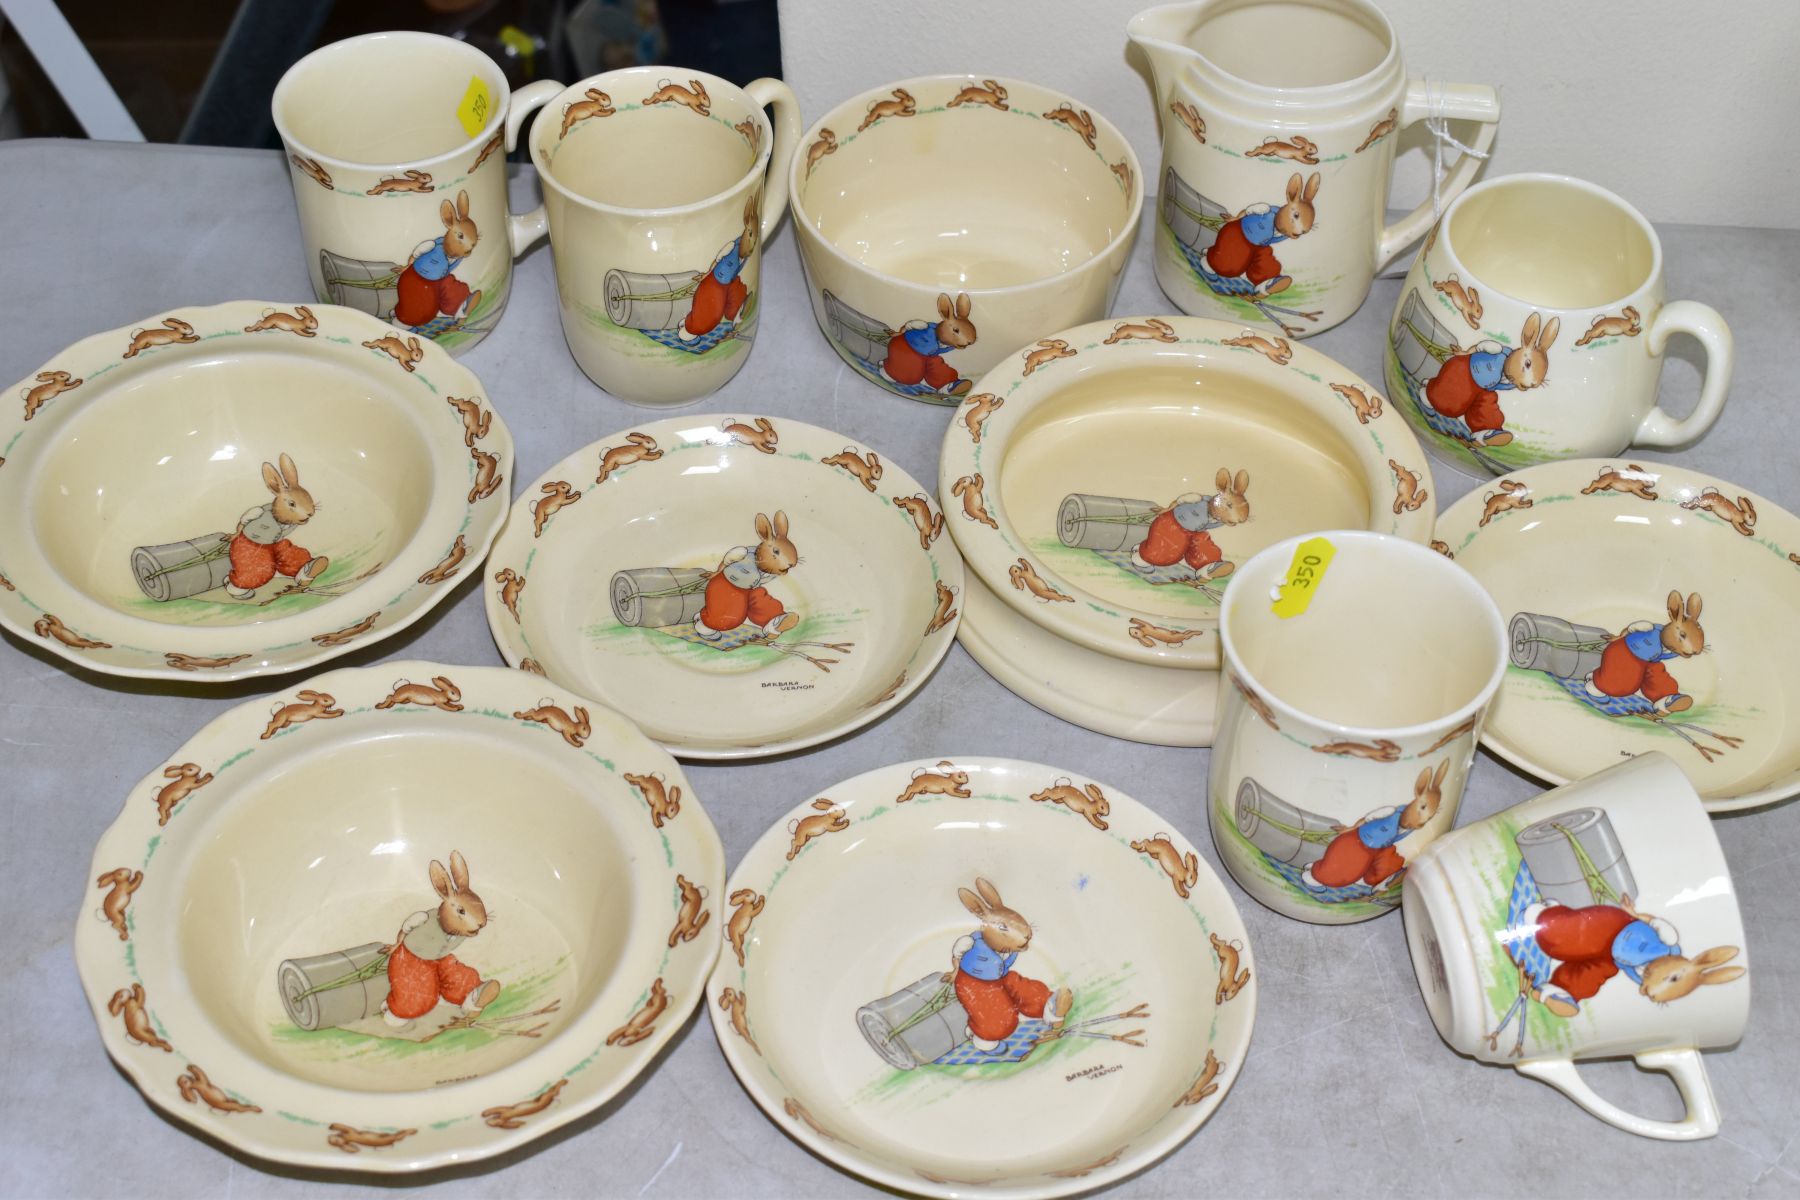 THIRTEEN PIECES OF ROYAL DOULTON BUNNYKINS EARTHENWARE TABLEWARES OF PRESSING TROUSERS SCENE HW14 BY